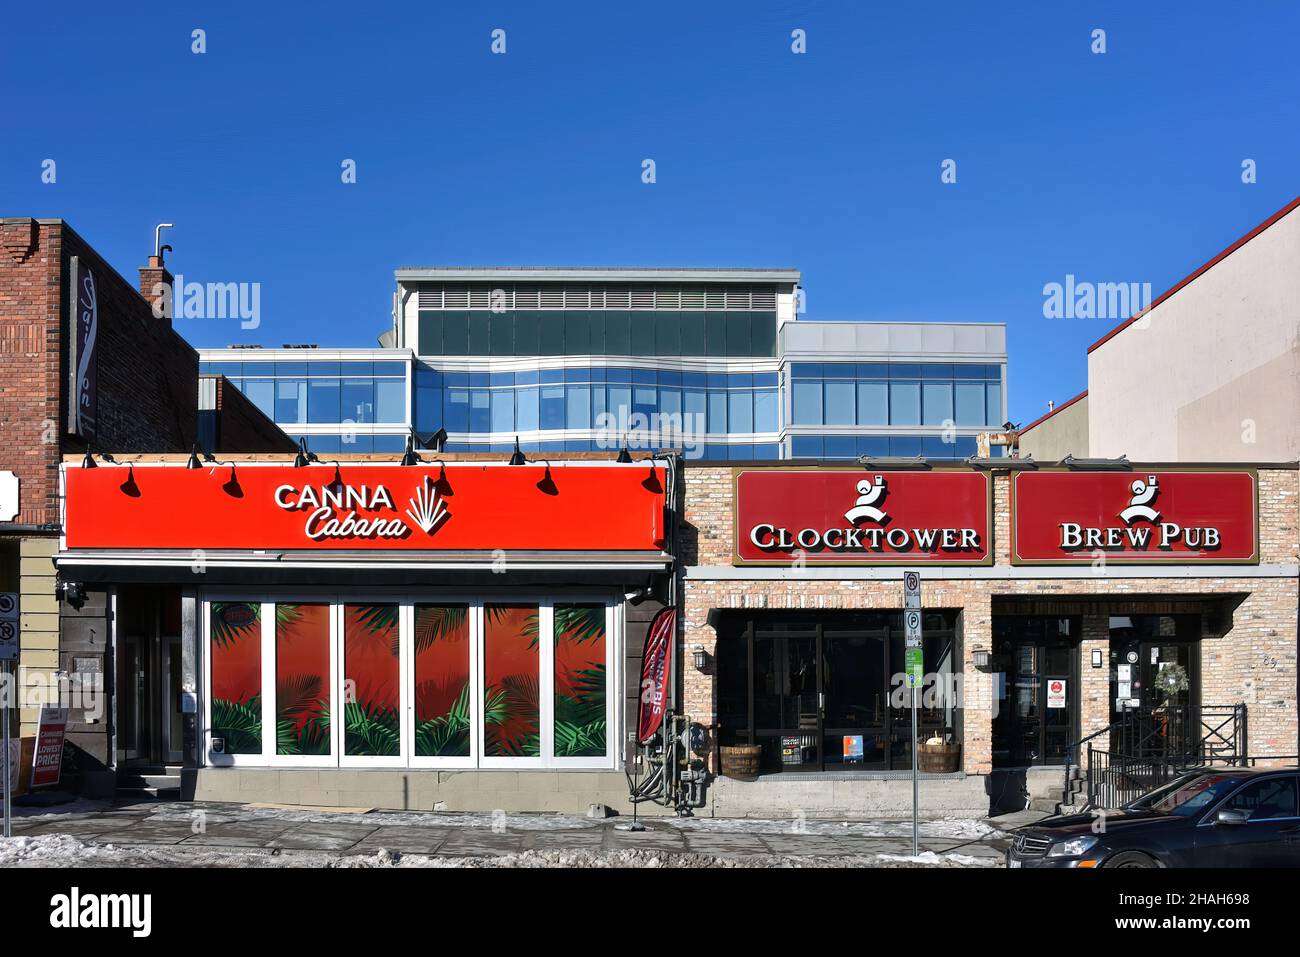 Ottawa, Canada - Dec 12, 2021: Canna Cannabis store and Clocktower Brew Pub on Clarence Street in the Byward Market, a popular tourist attraction. Stock Photo